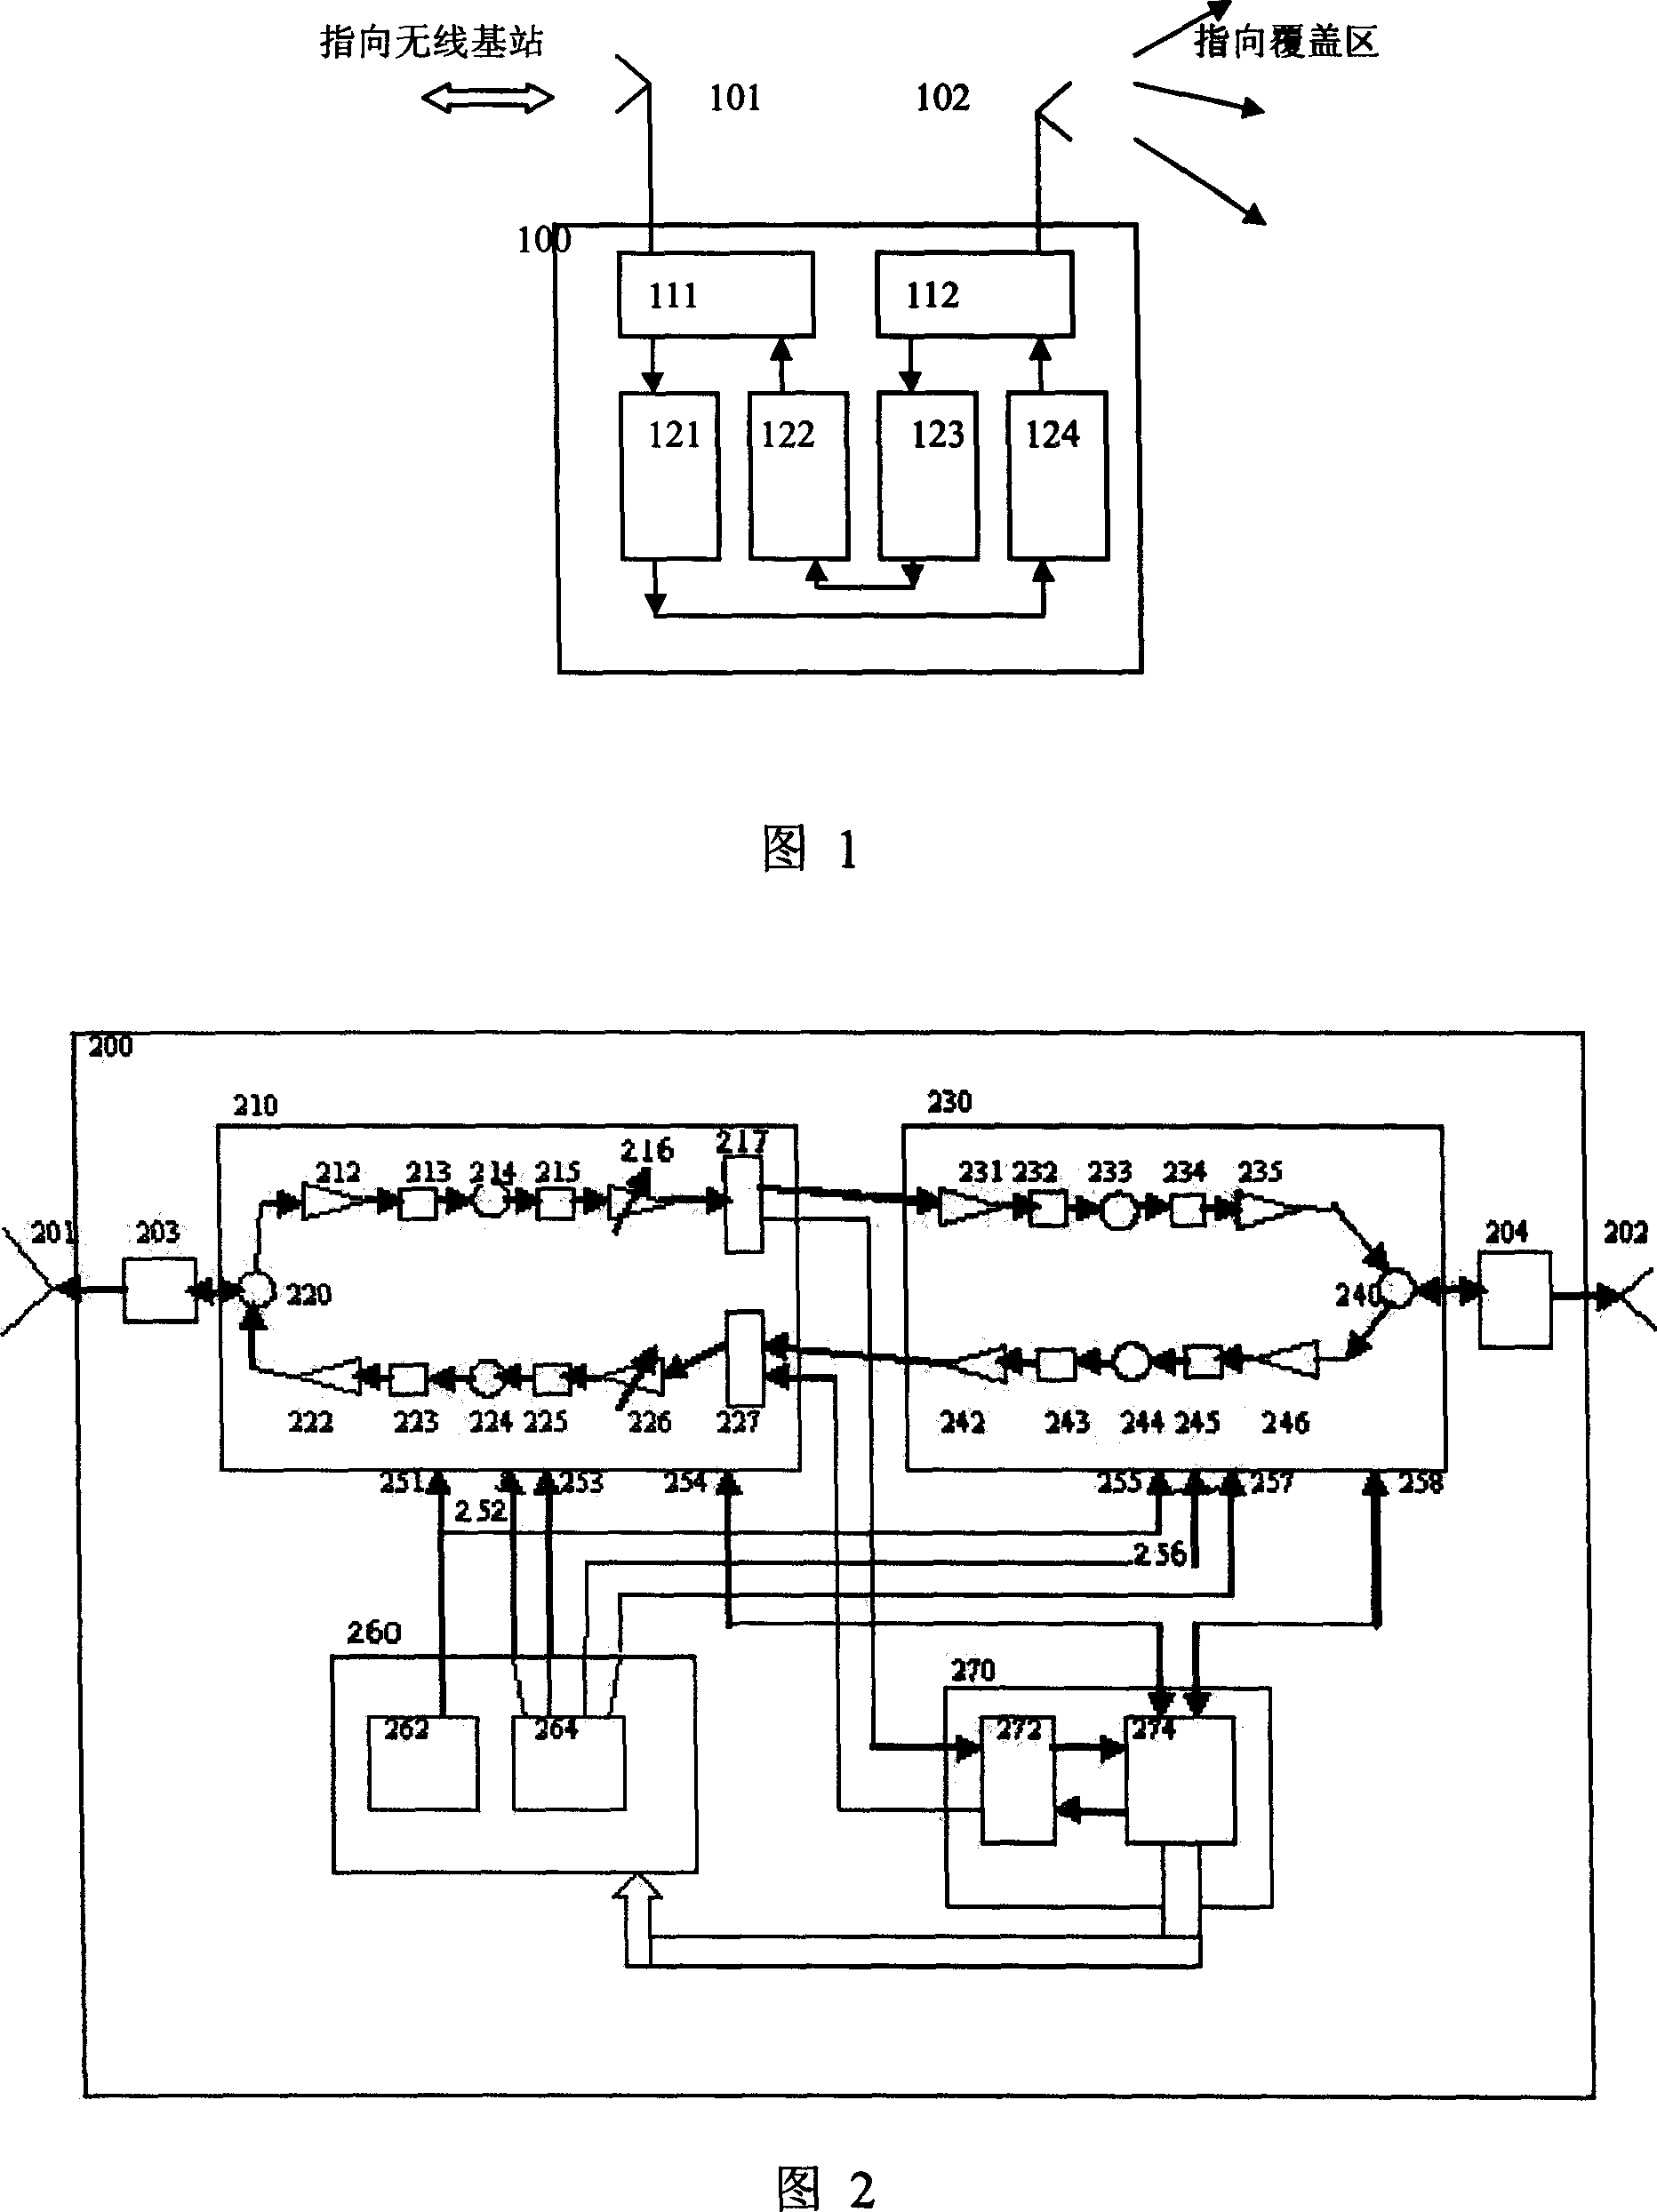 A method and device for relay amplification in TD-SCDMA system